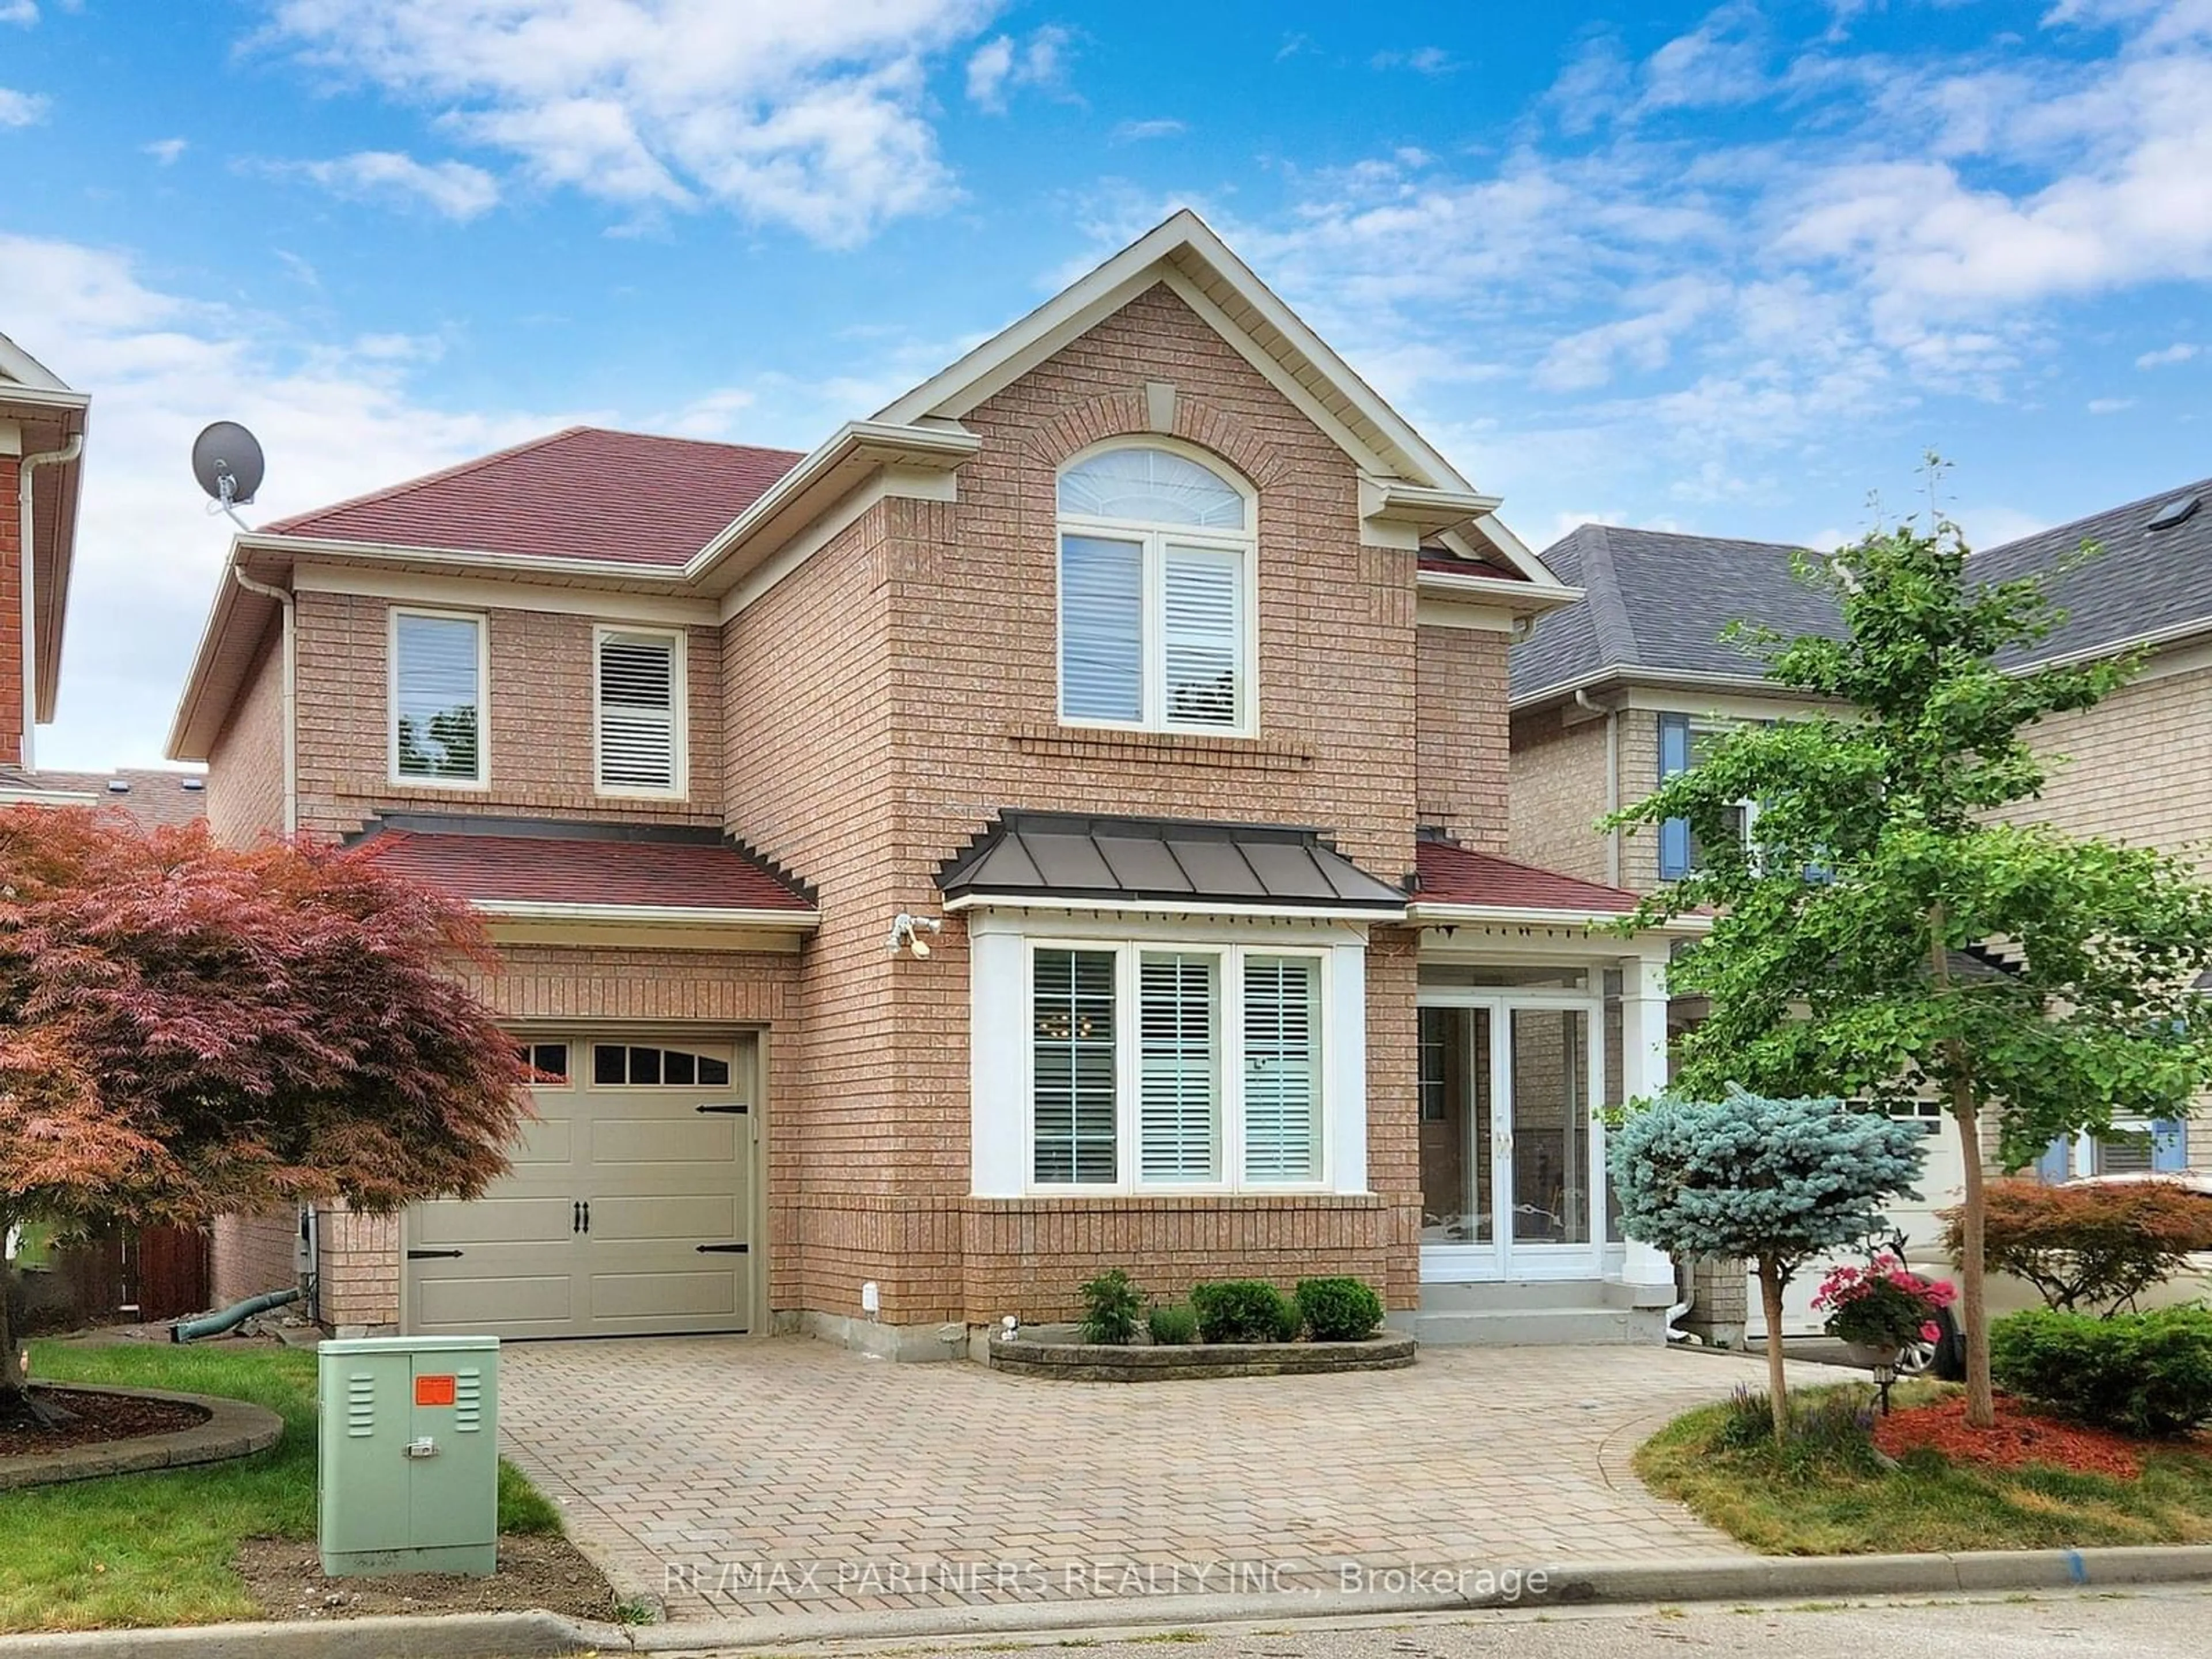 Home with brick exterior material for 63 Aries Cres, Markham Ontario L6C 2B7